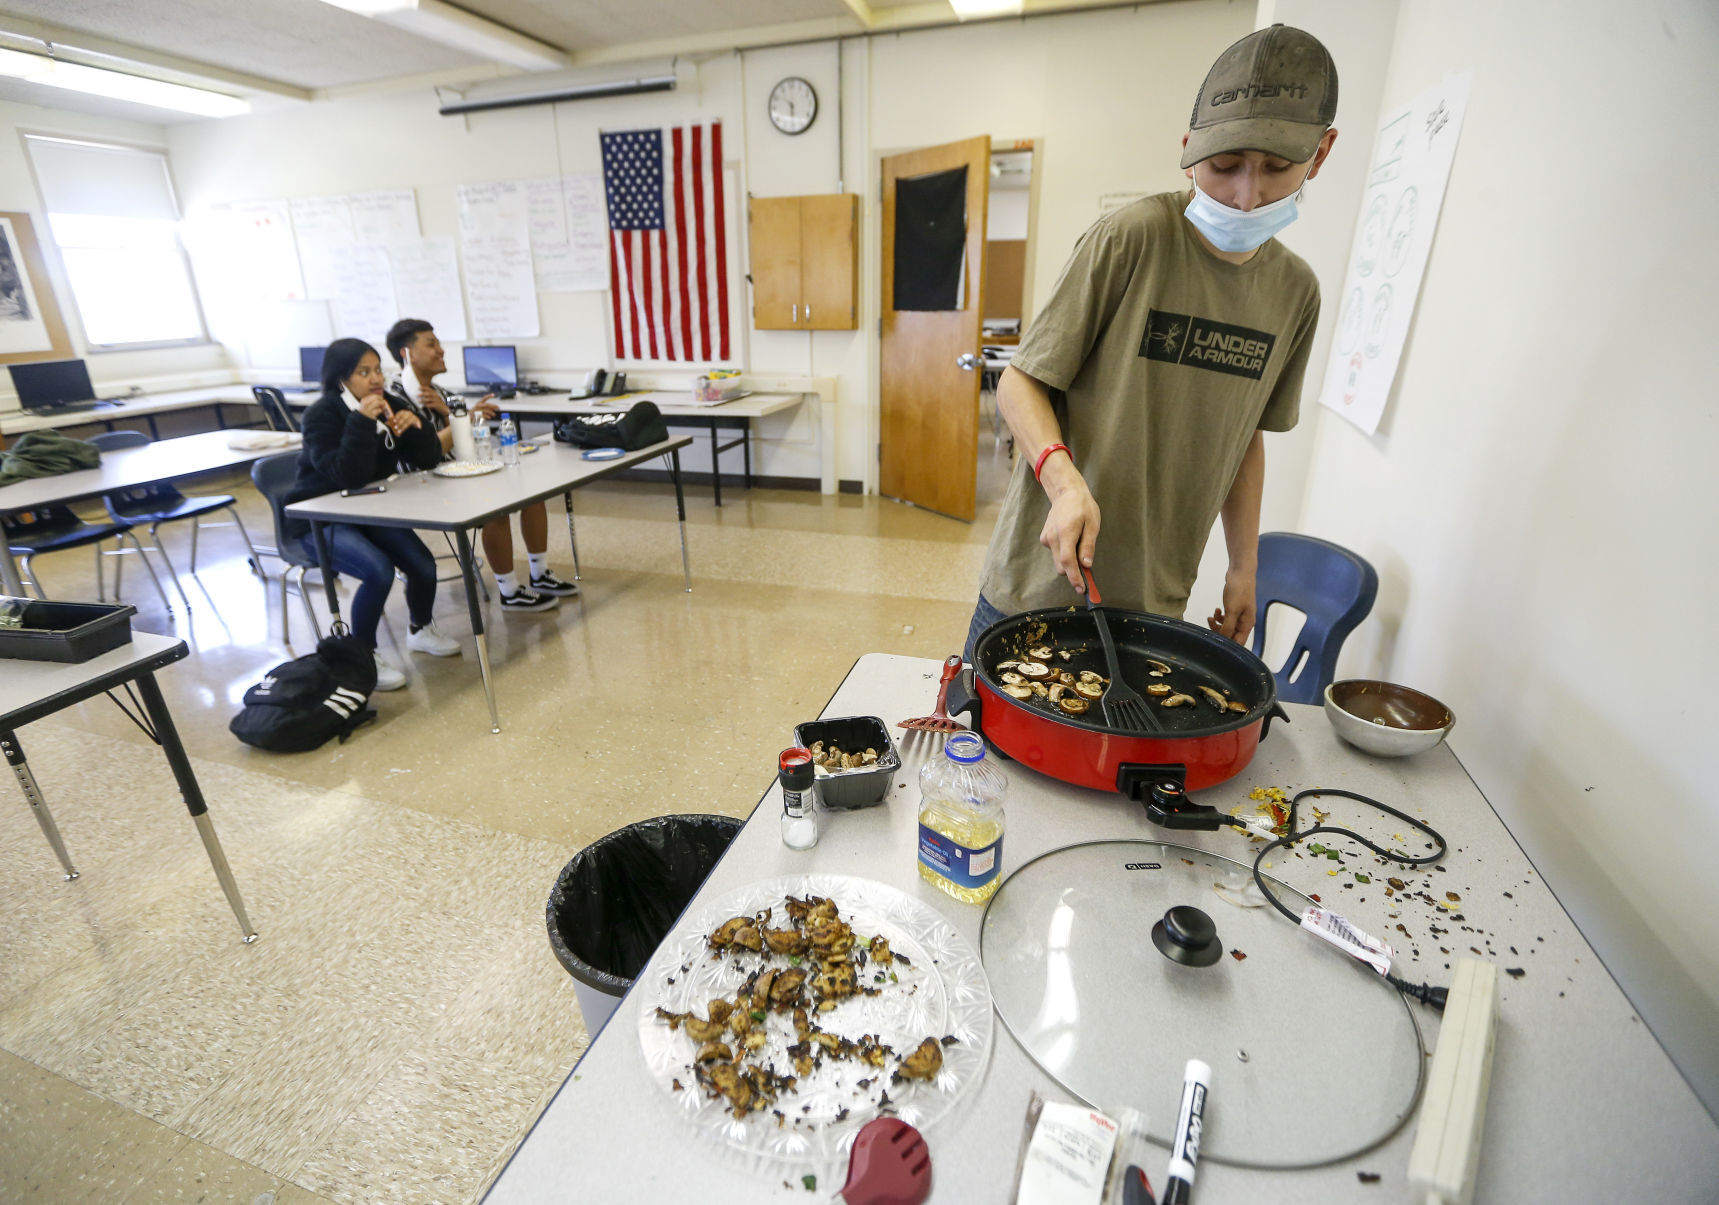 Alternative Learning Center student Dylan Galle, 17, cooks food Friday using the microgreens grown in class. PHOTO CREDIT: Dave Kettering